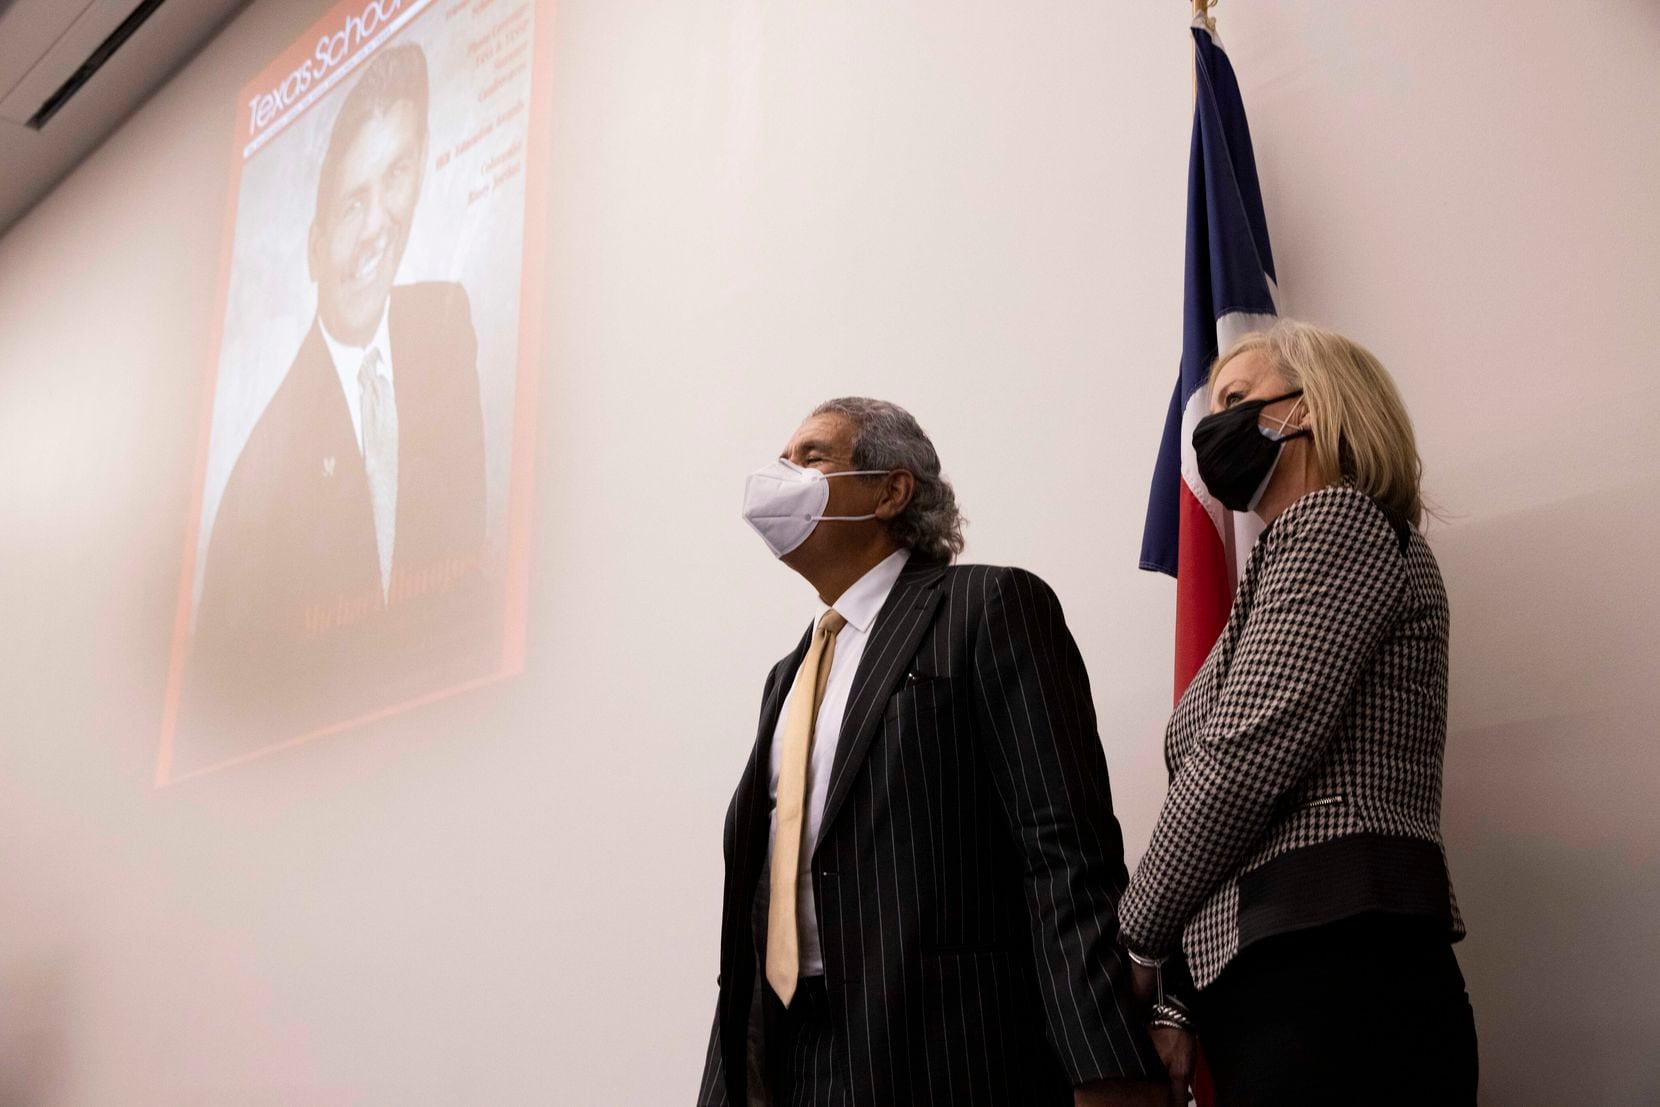 Dallas ISD superintendent Michael Hinojosa (left) holds his wife Kitty's hand as they watch a slideshow of his life during a press conference announcing he will be leaving DISD by the end of the year.